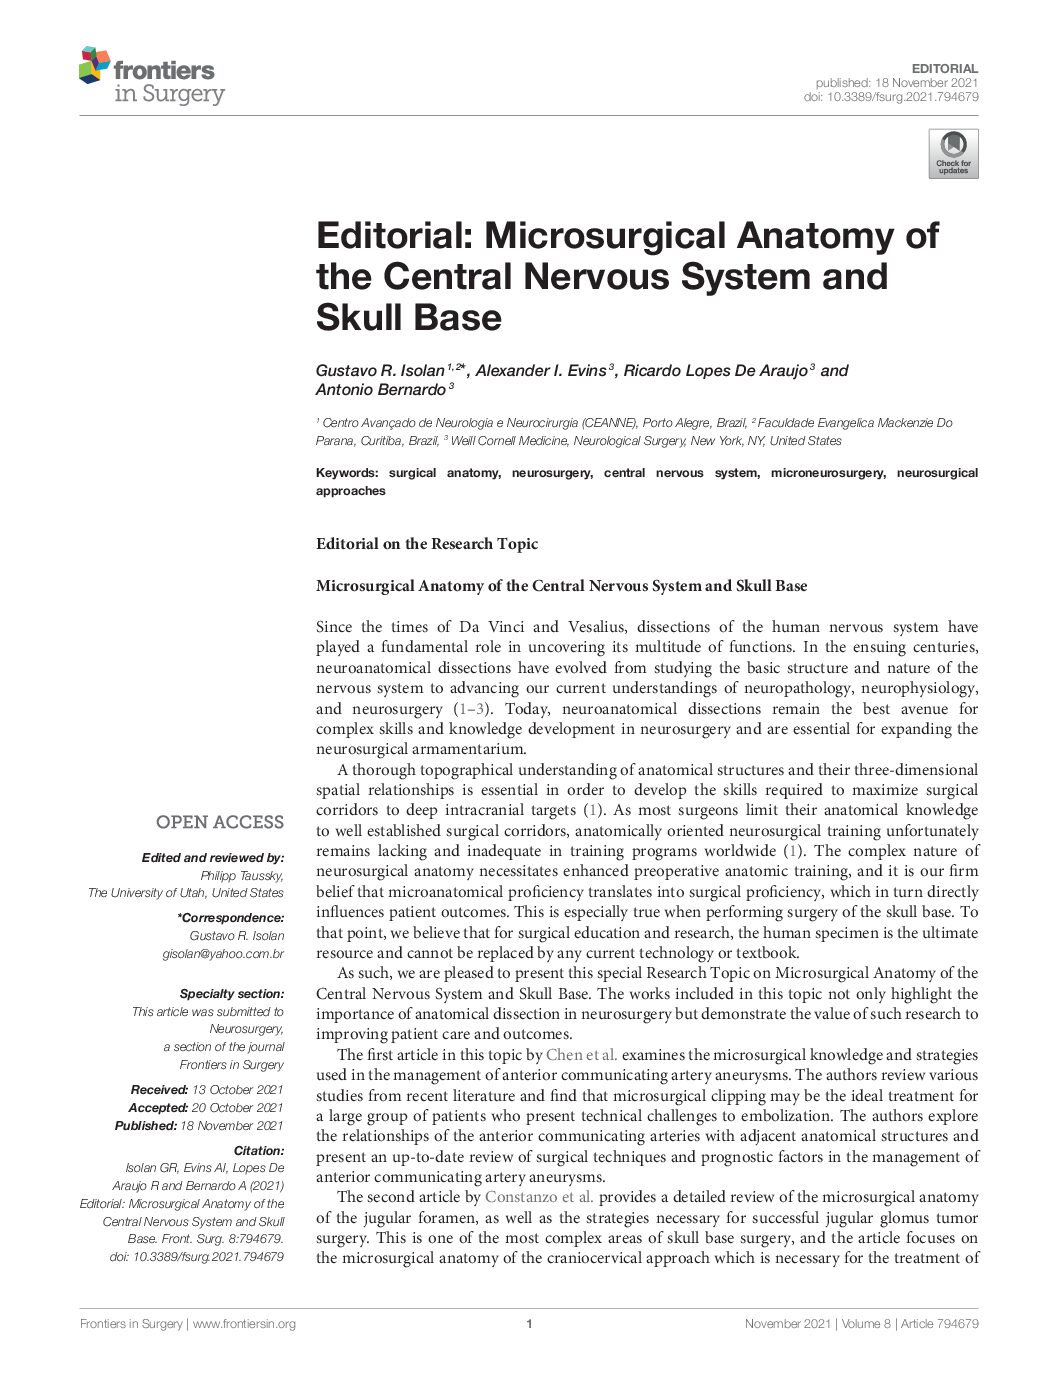 Fronteiras Editoriais: Microsurgical Anatomy Of The Central Nervous System And Skull Base